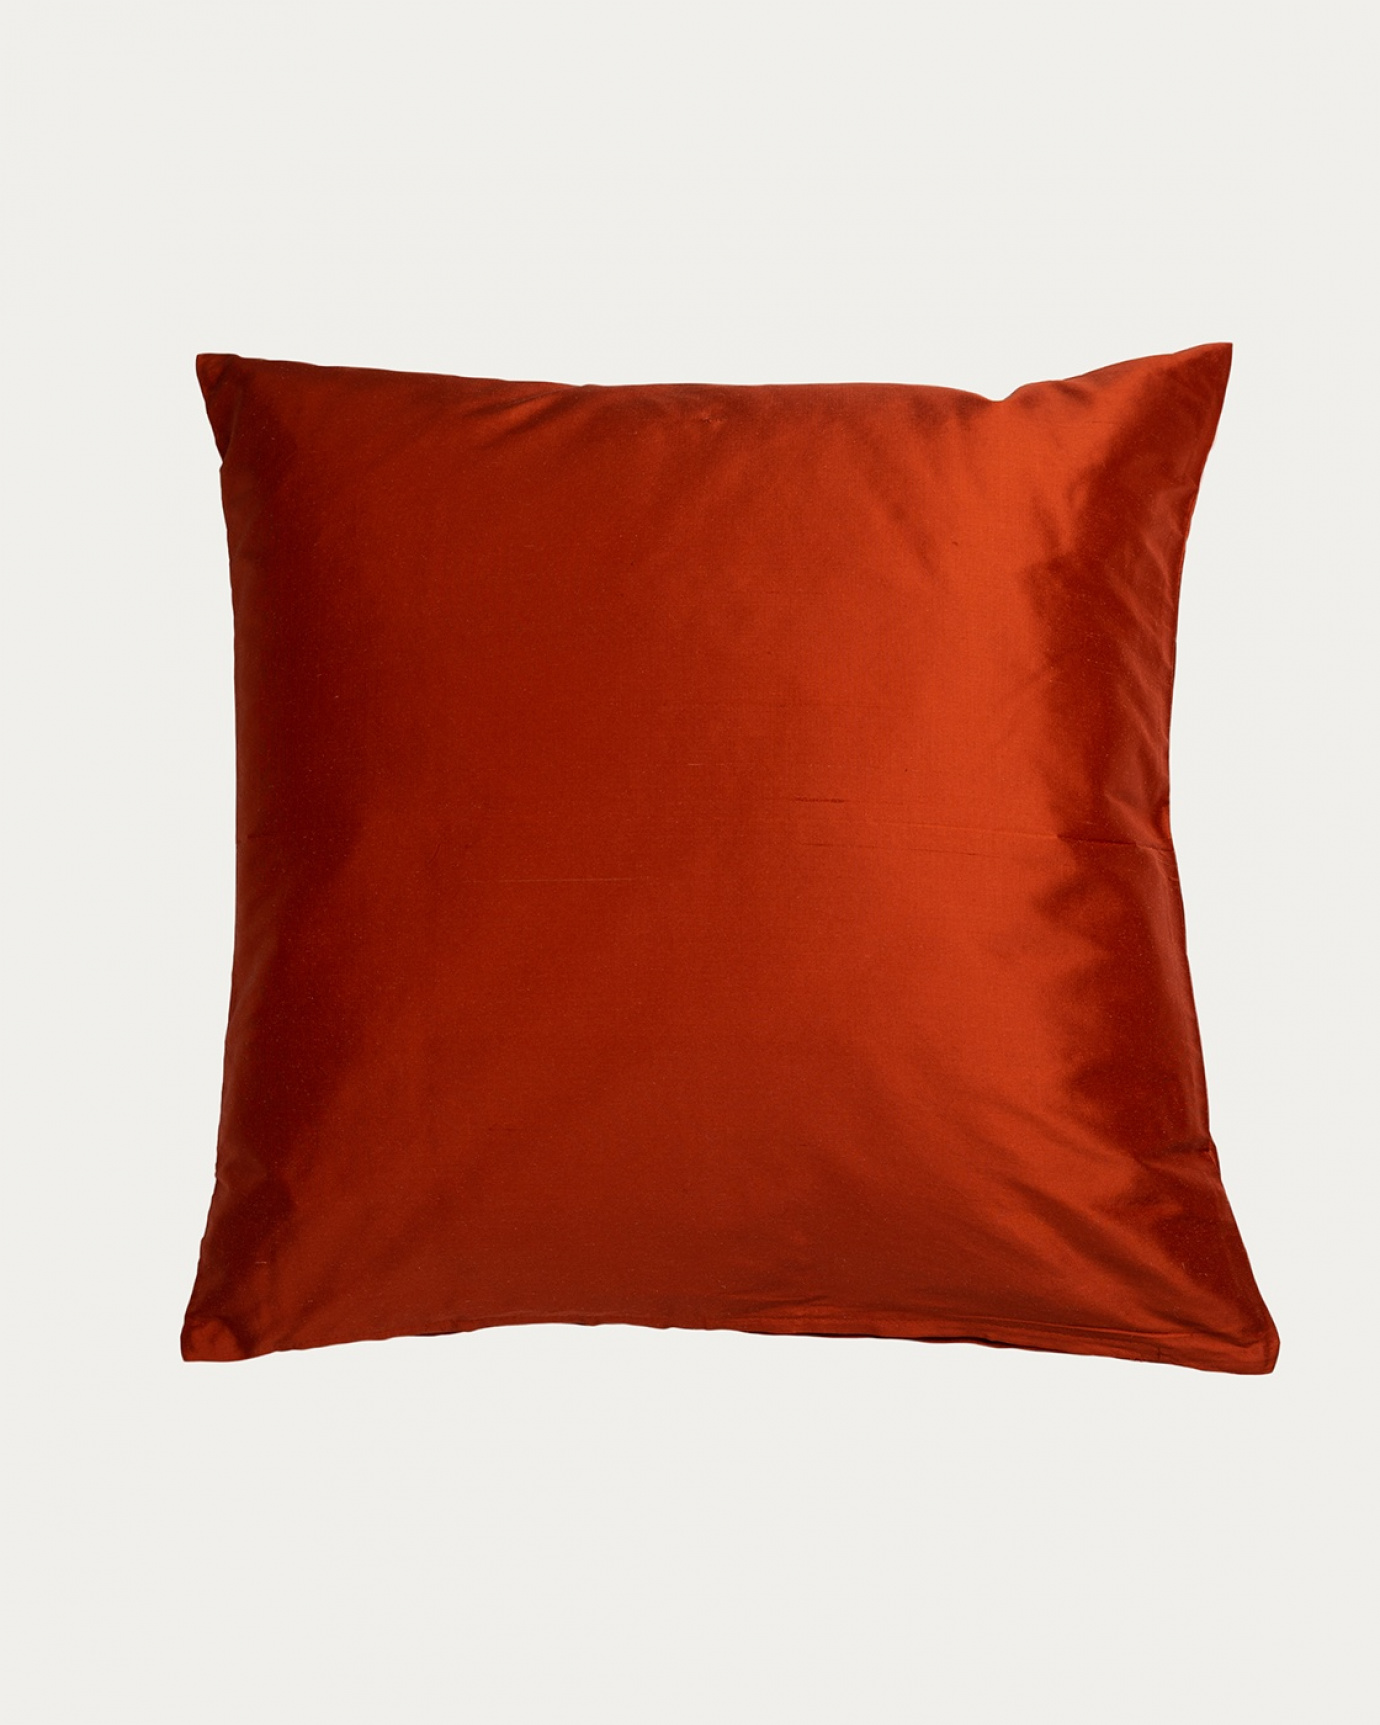 Product image rusty orange SILK cushion cover made of 100% dupion silk that gives a nice lustre from LINUM DESIGN. Size 50x50 cm.